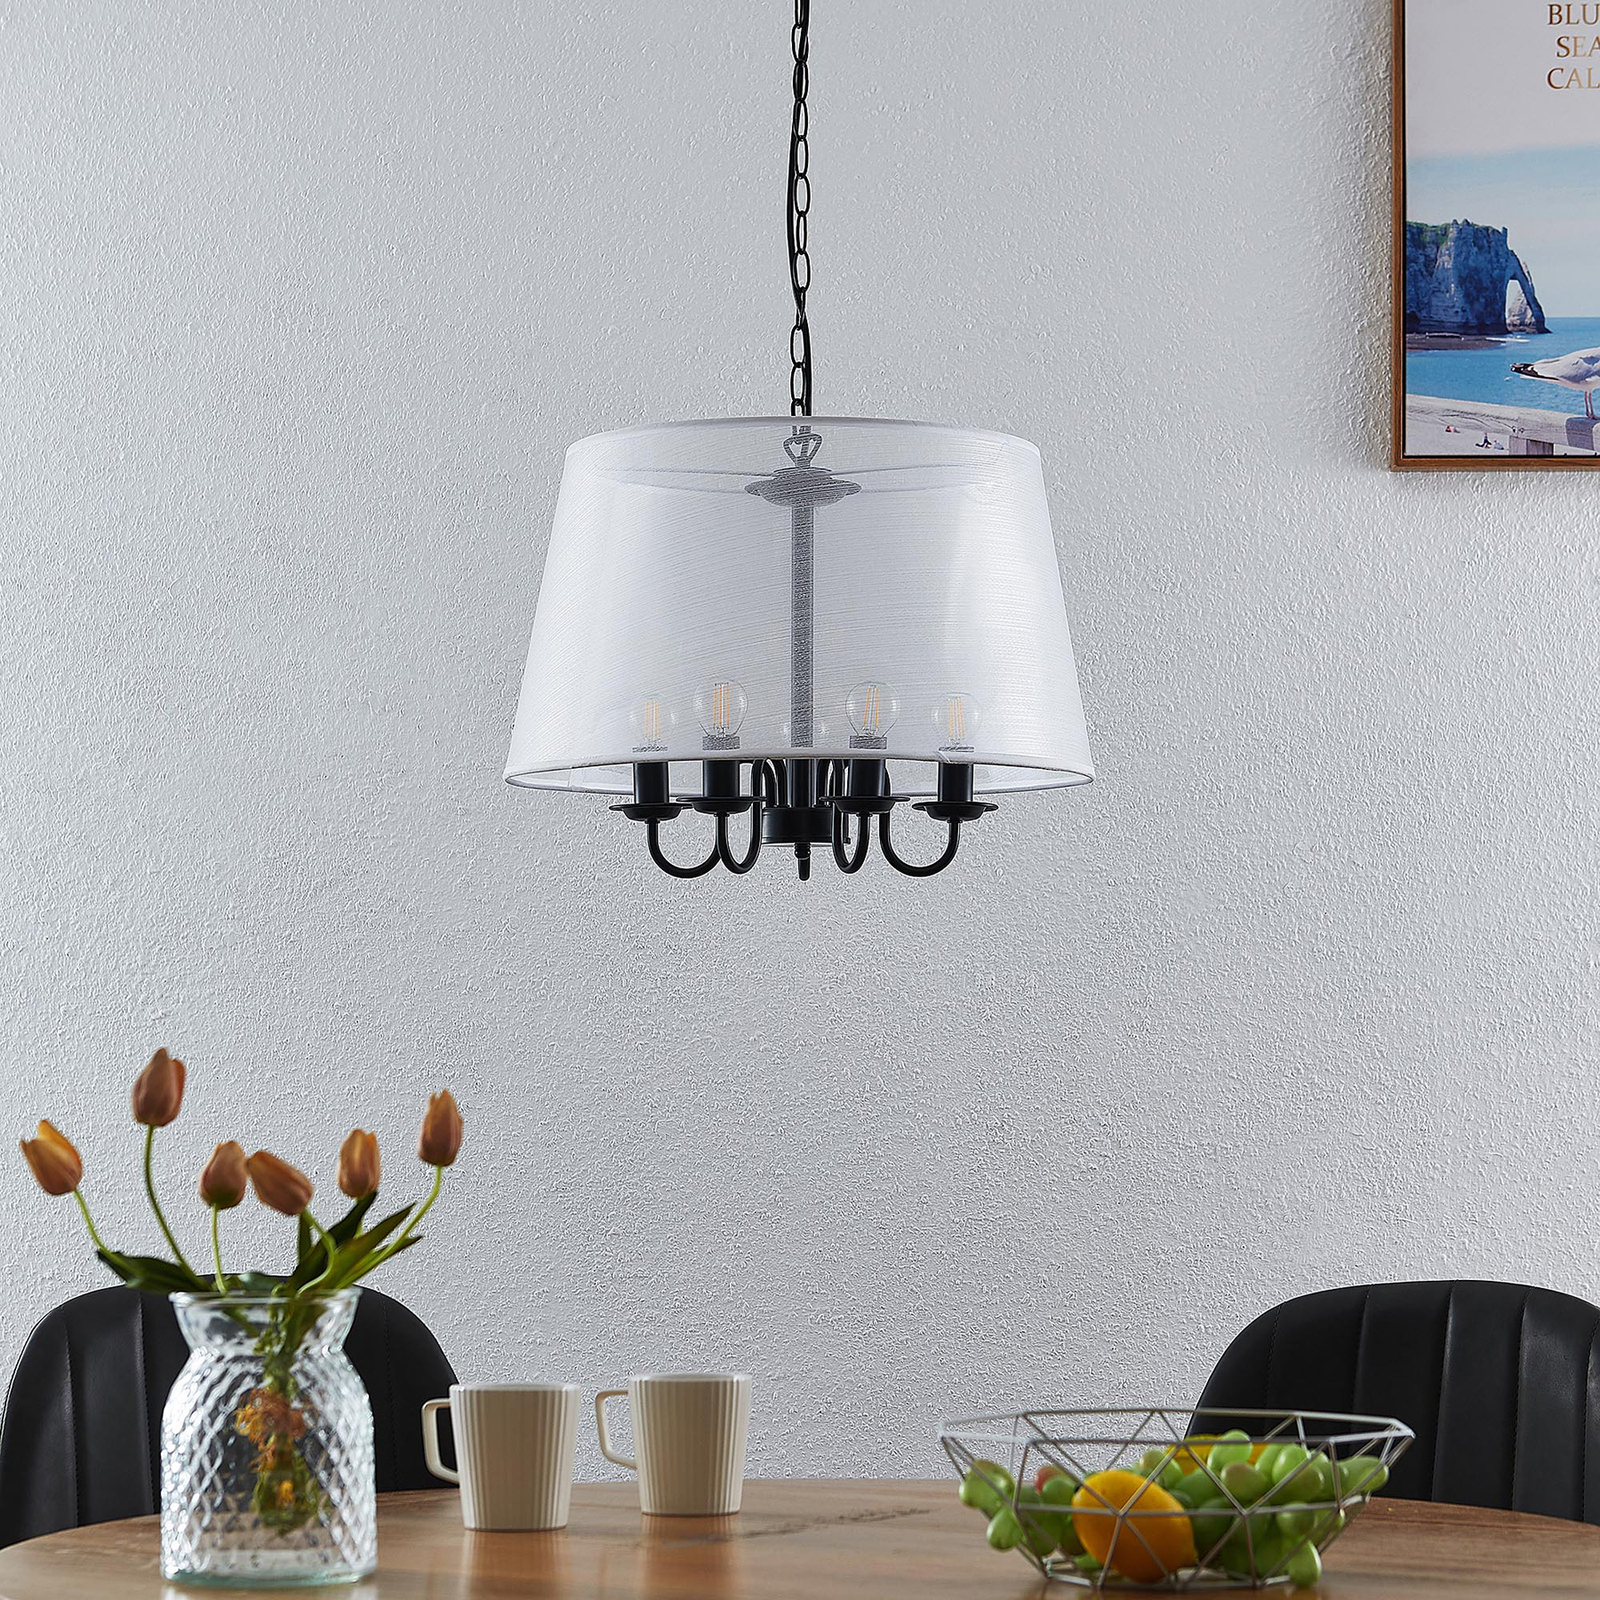 Lindby wit | Lampen24.be